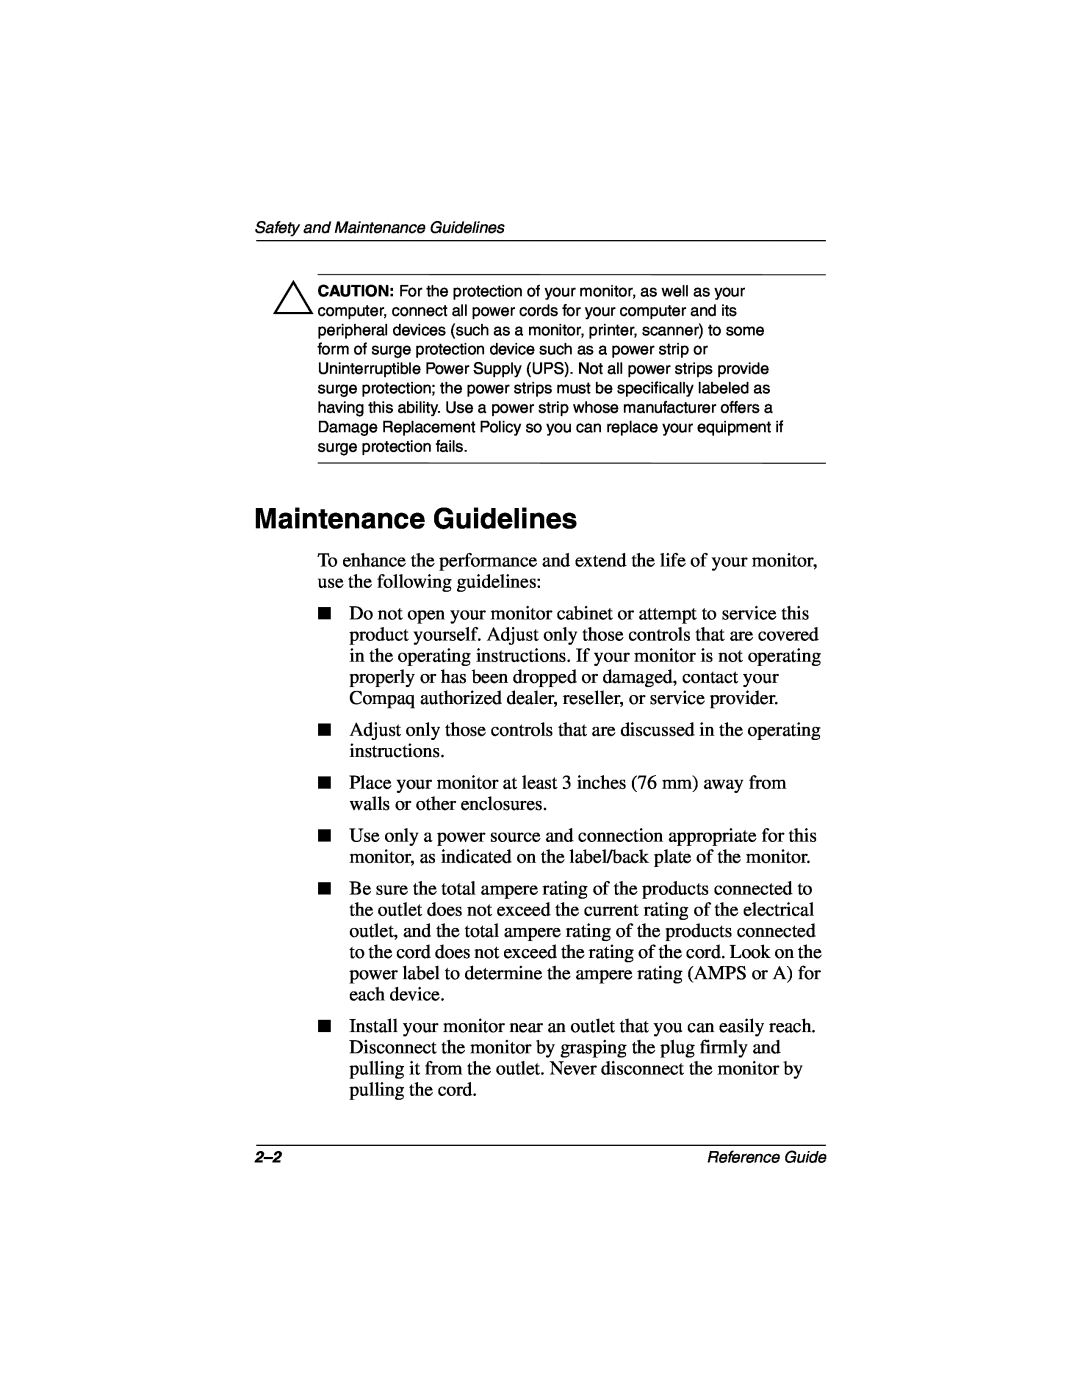 Compaq 5017 manual Safety and Maintenance Guidelines 